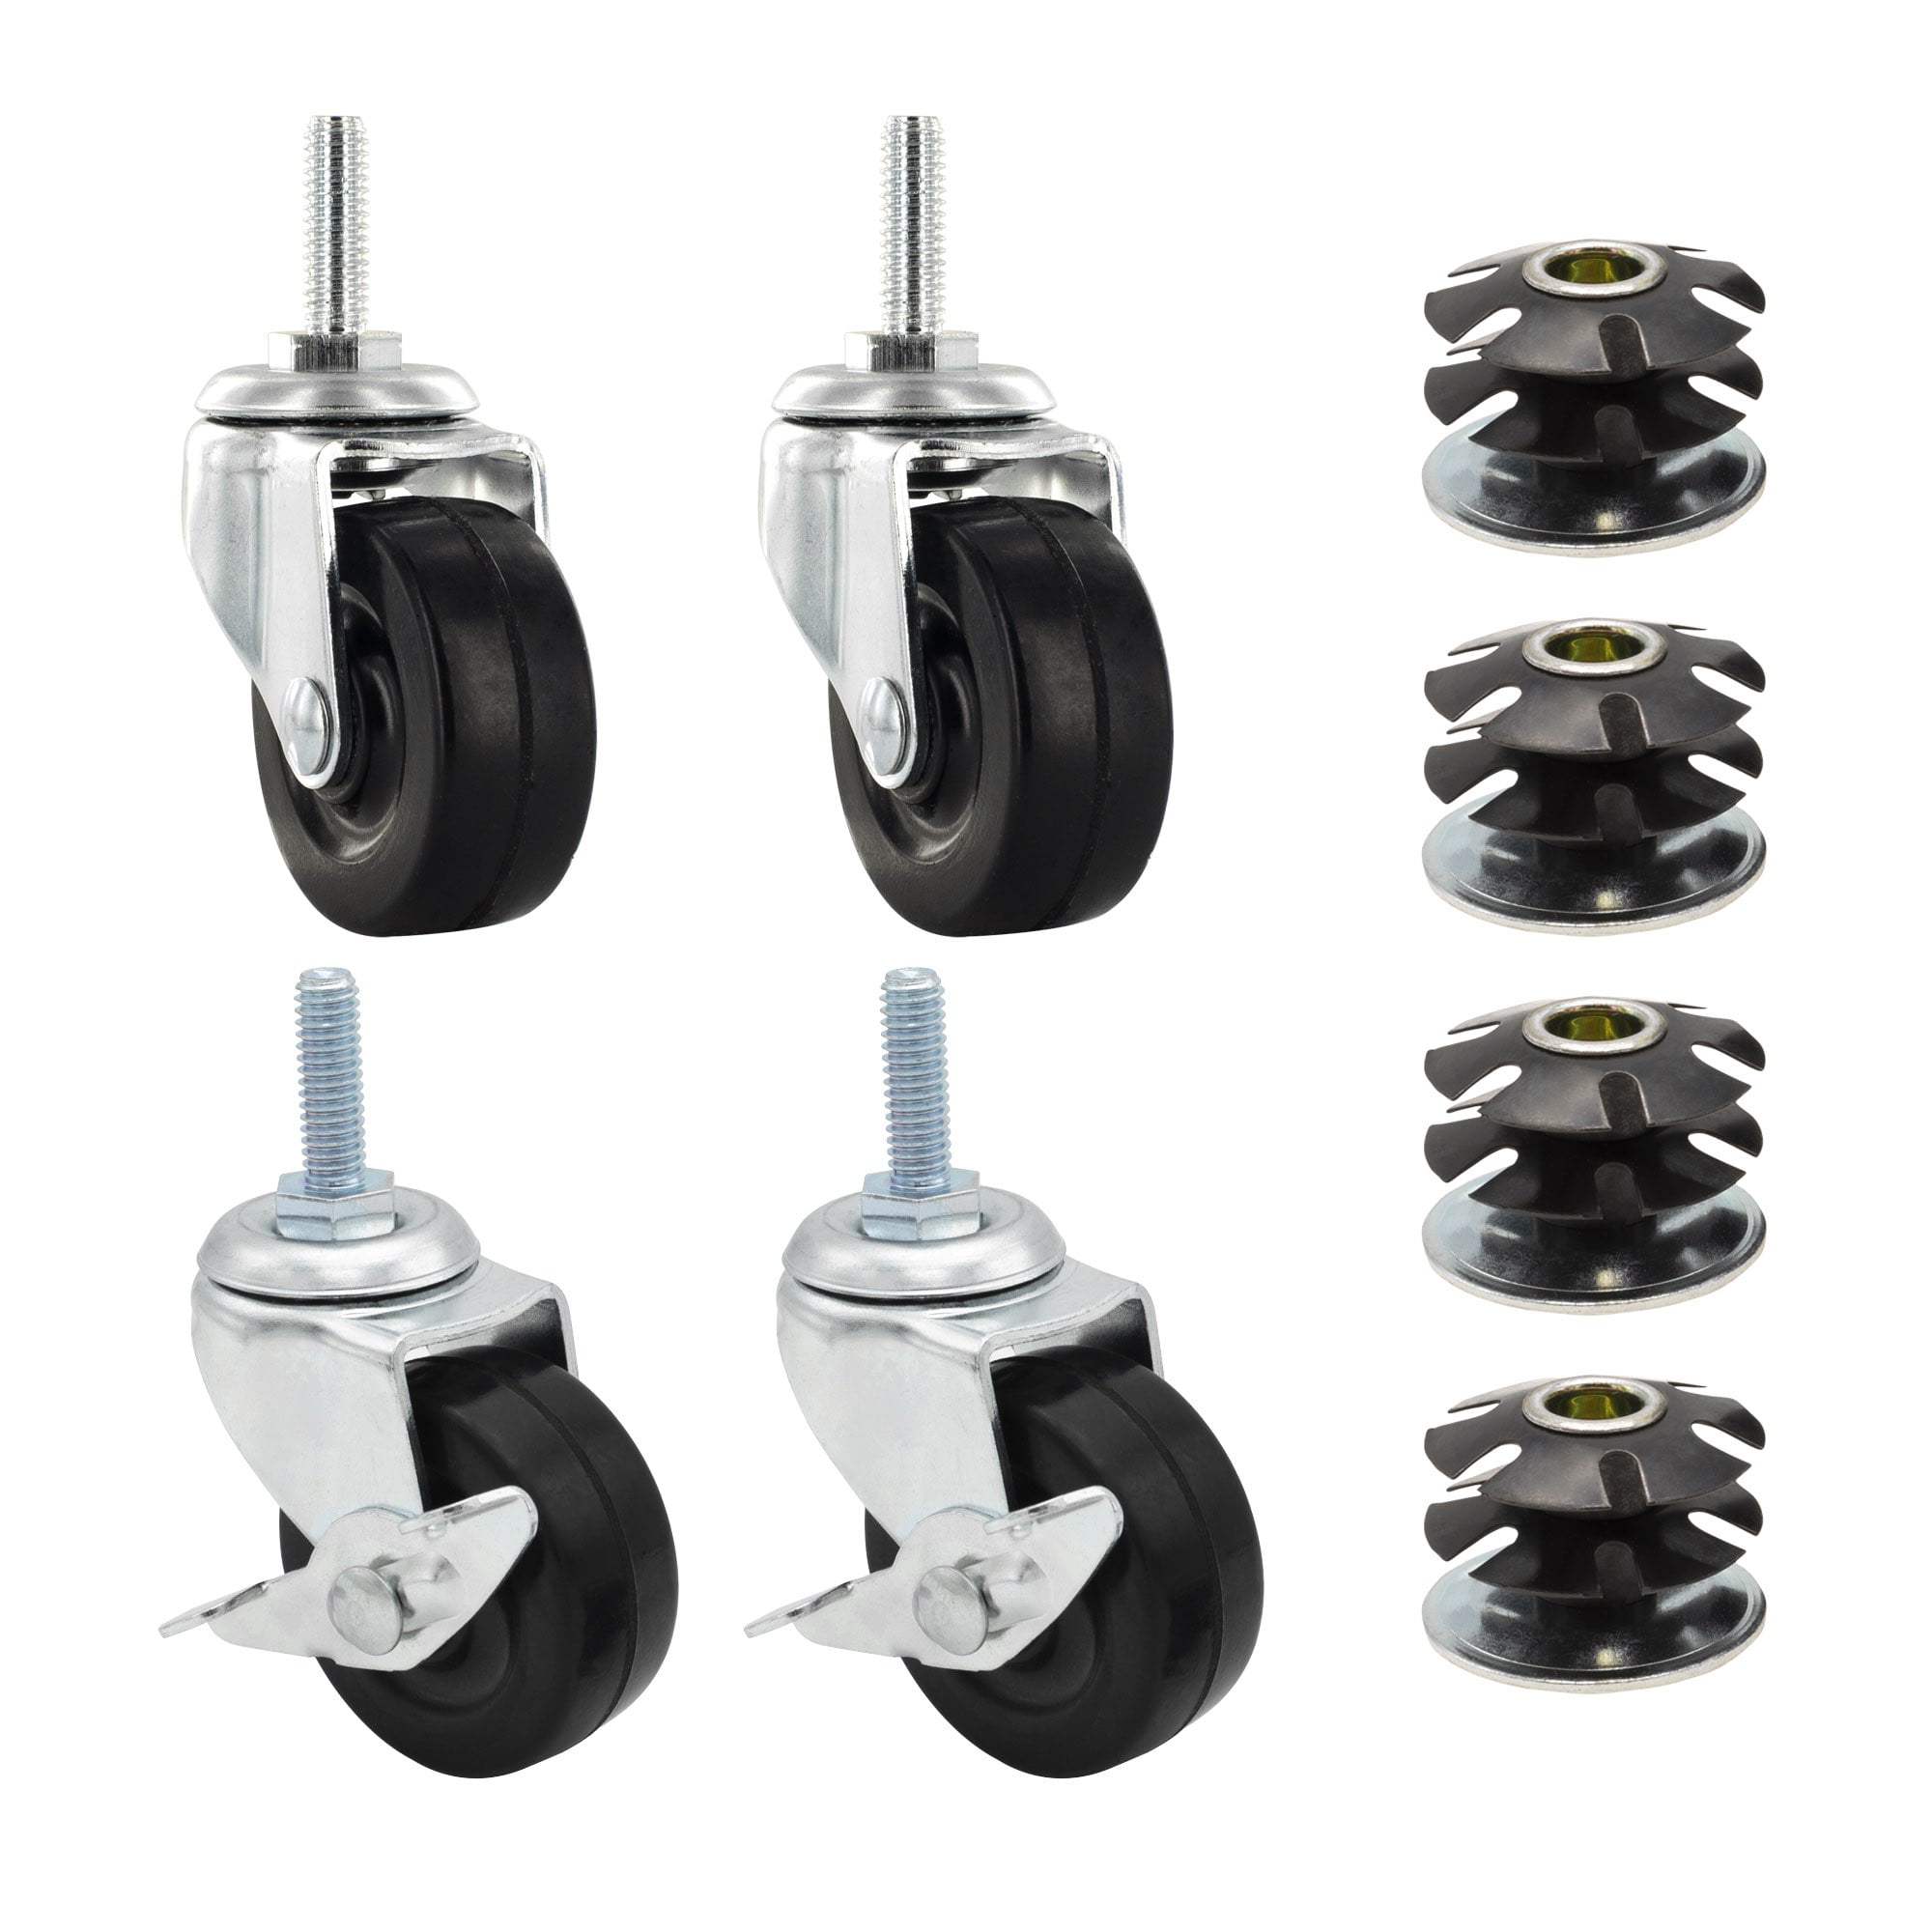 1 Inch Metal Round Double Star Caster Insert with 2 Inch Casters Without Brakes